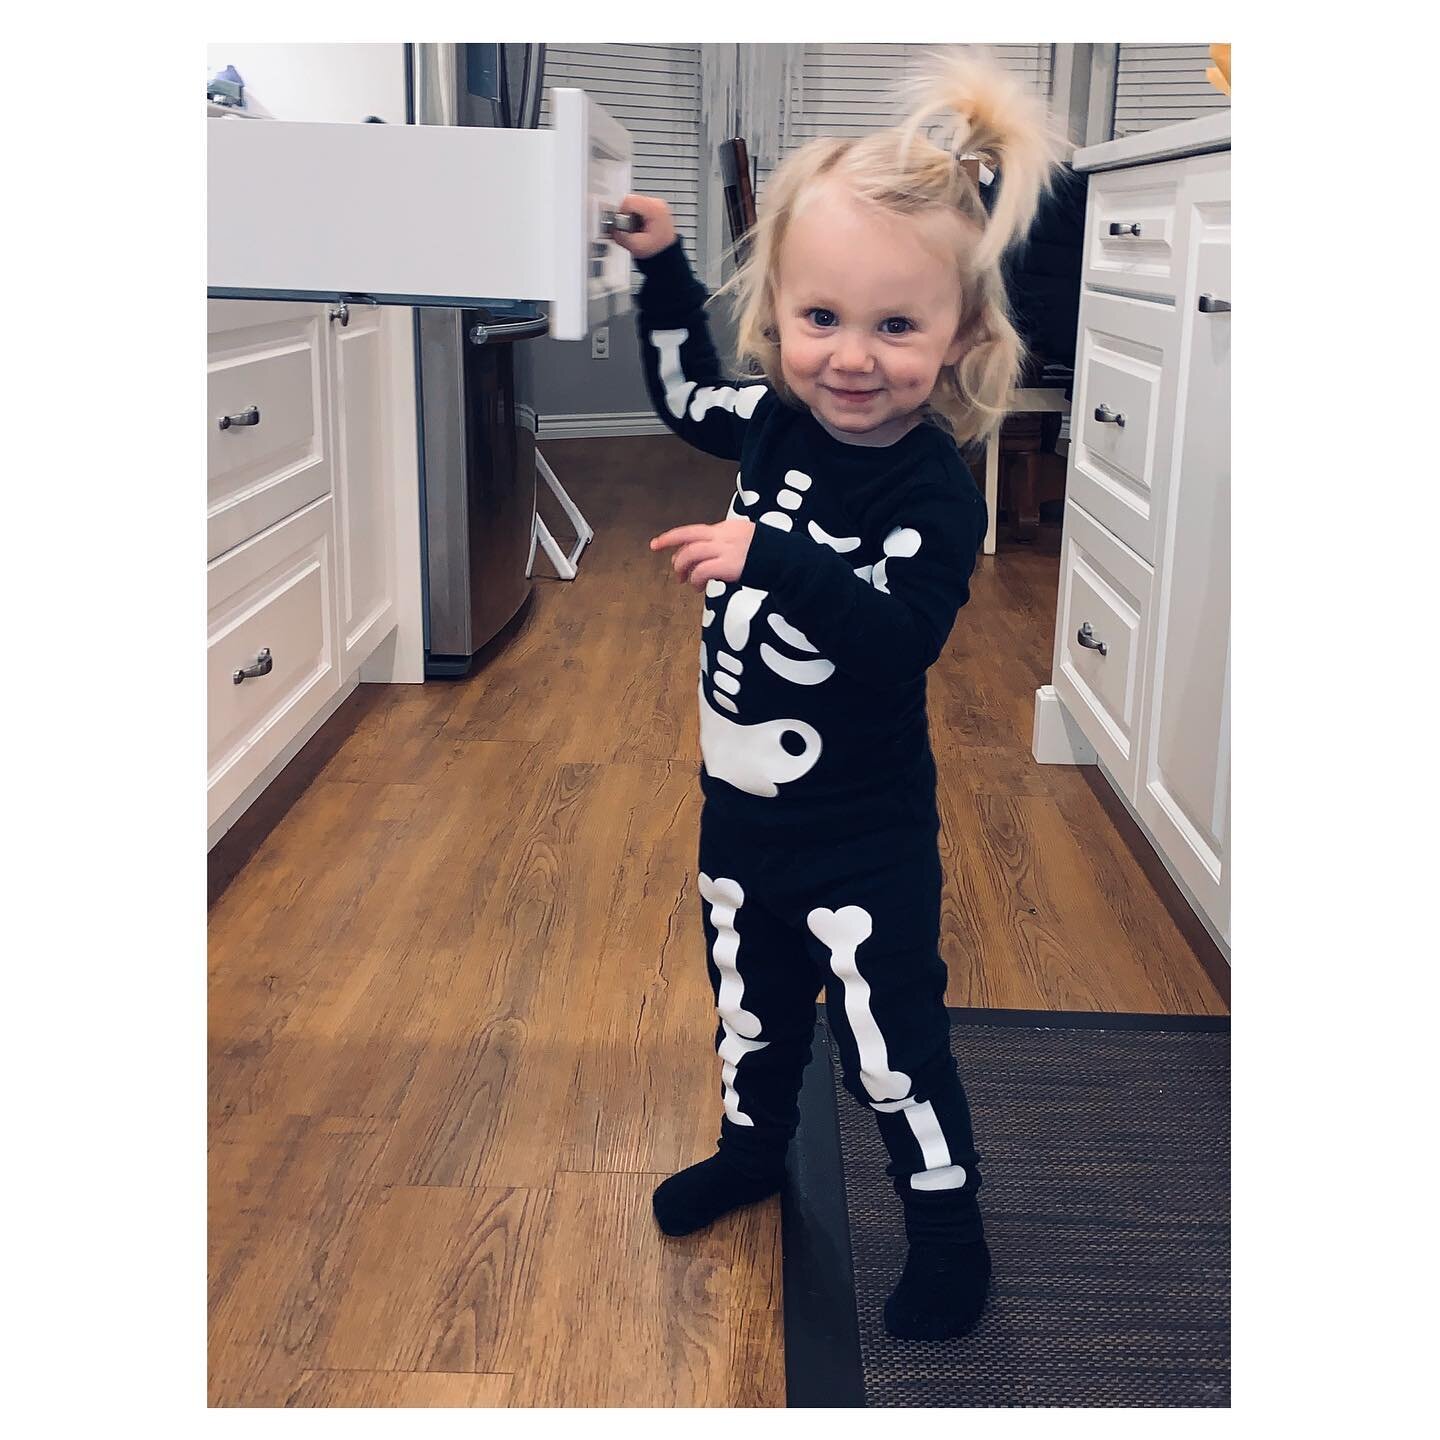 Happy Halloween from the face of Watkins Co. (she&rsquo;s slightly cuter than her dad) 🎃👻🍁
Anyone else already eat all their Halloween candy to hand out and need to buy more...? Just me?